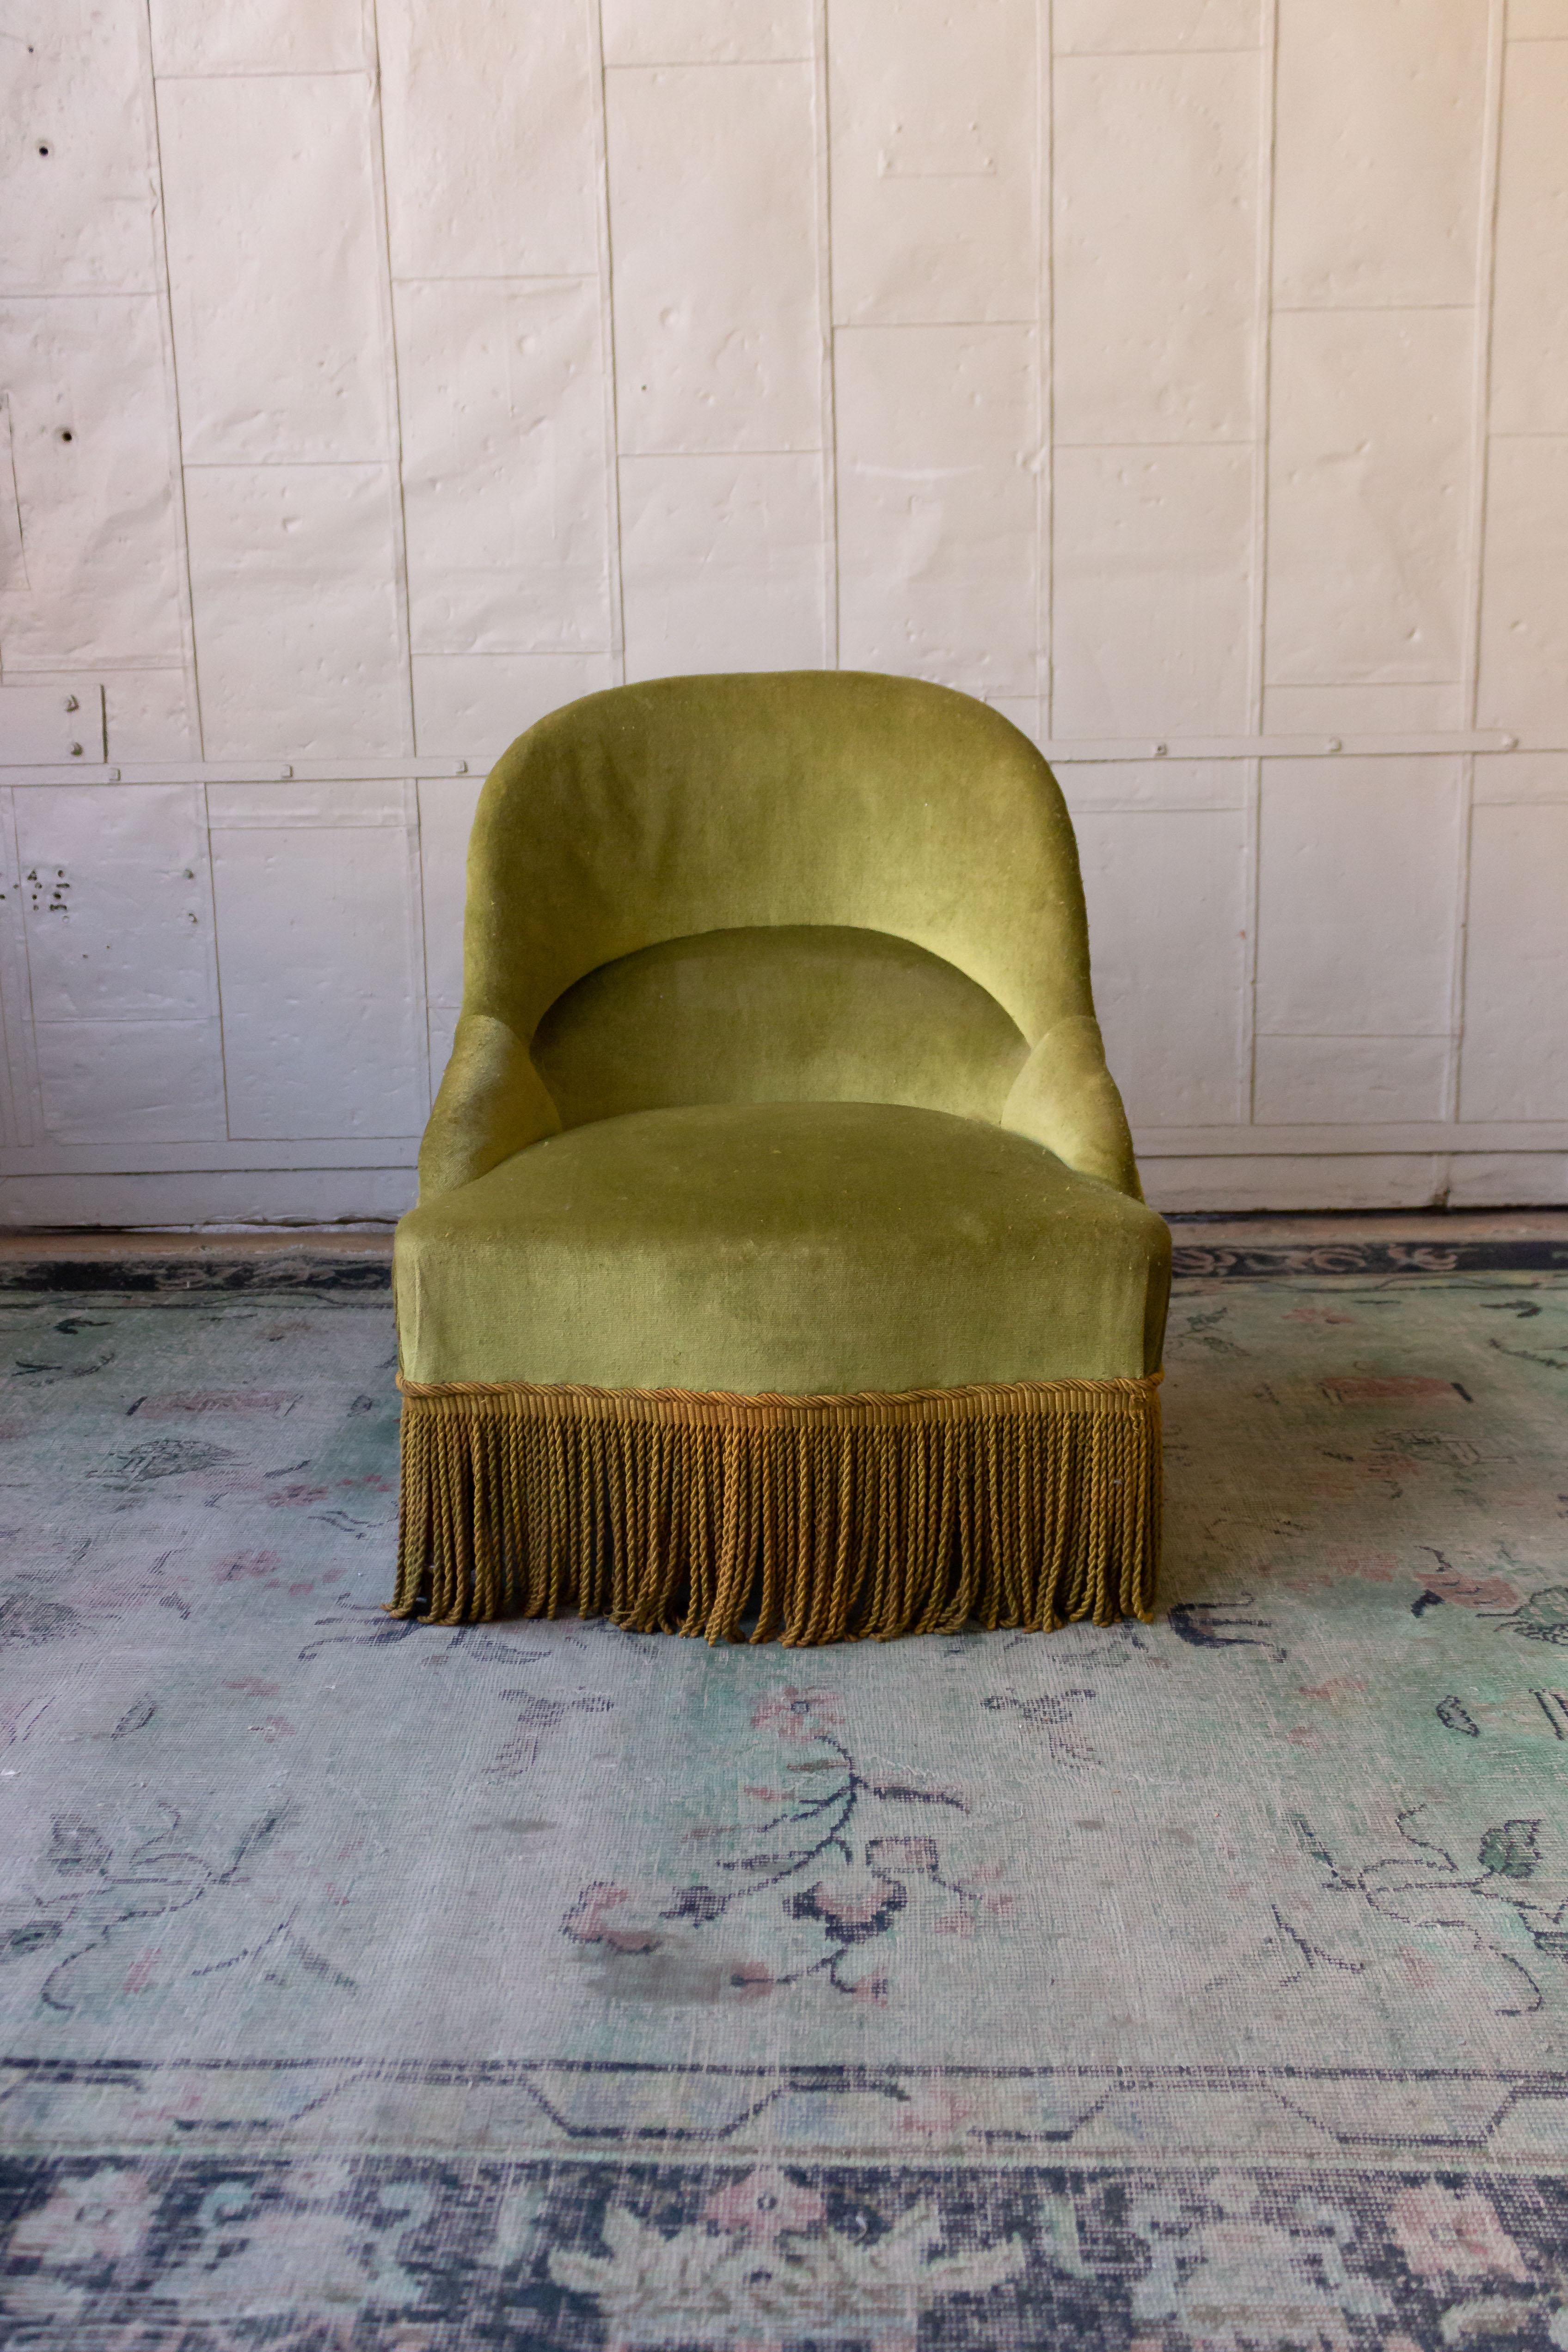 Pair of Napoleon III style slipper chairs in green velvet with contrasting bullion fringe, French, early 20th century. Sold as is.